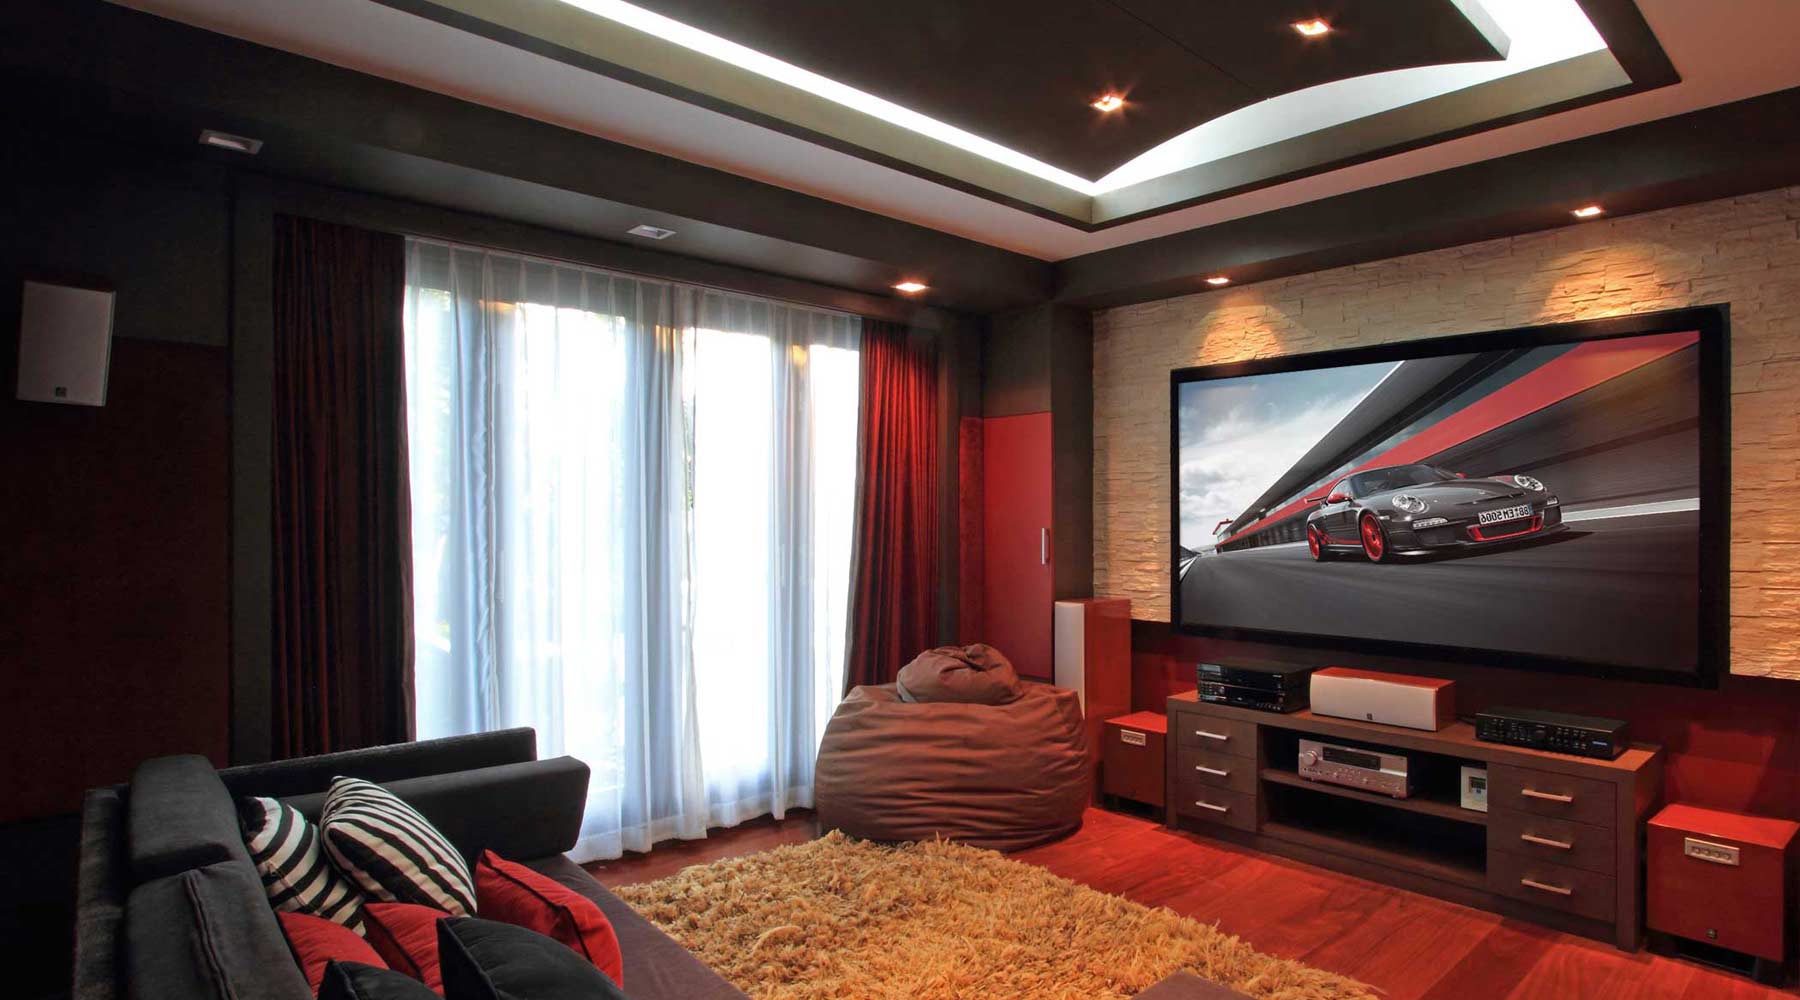 Screen Innovations makes the best home theater projection screens